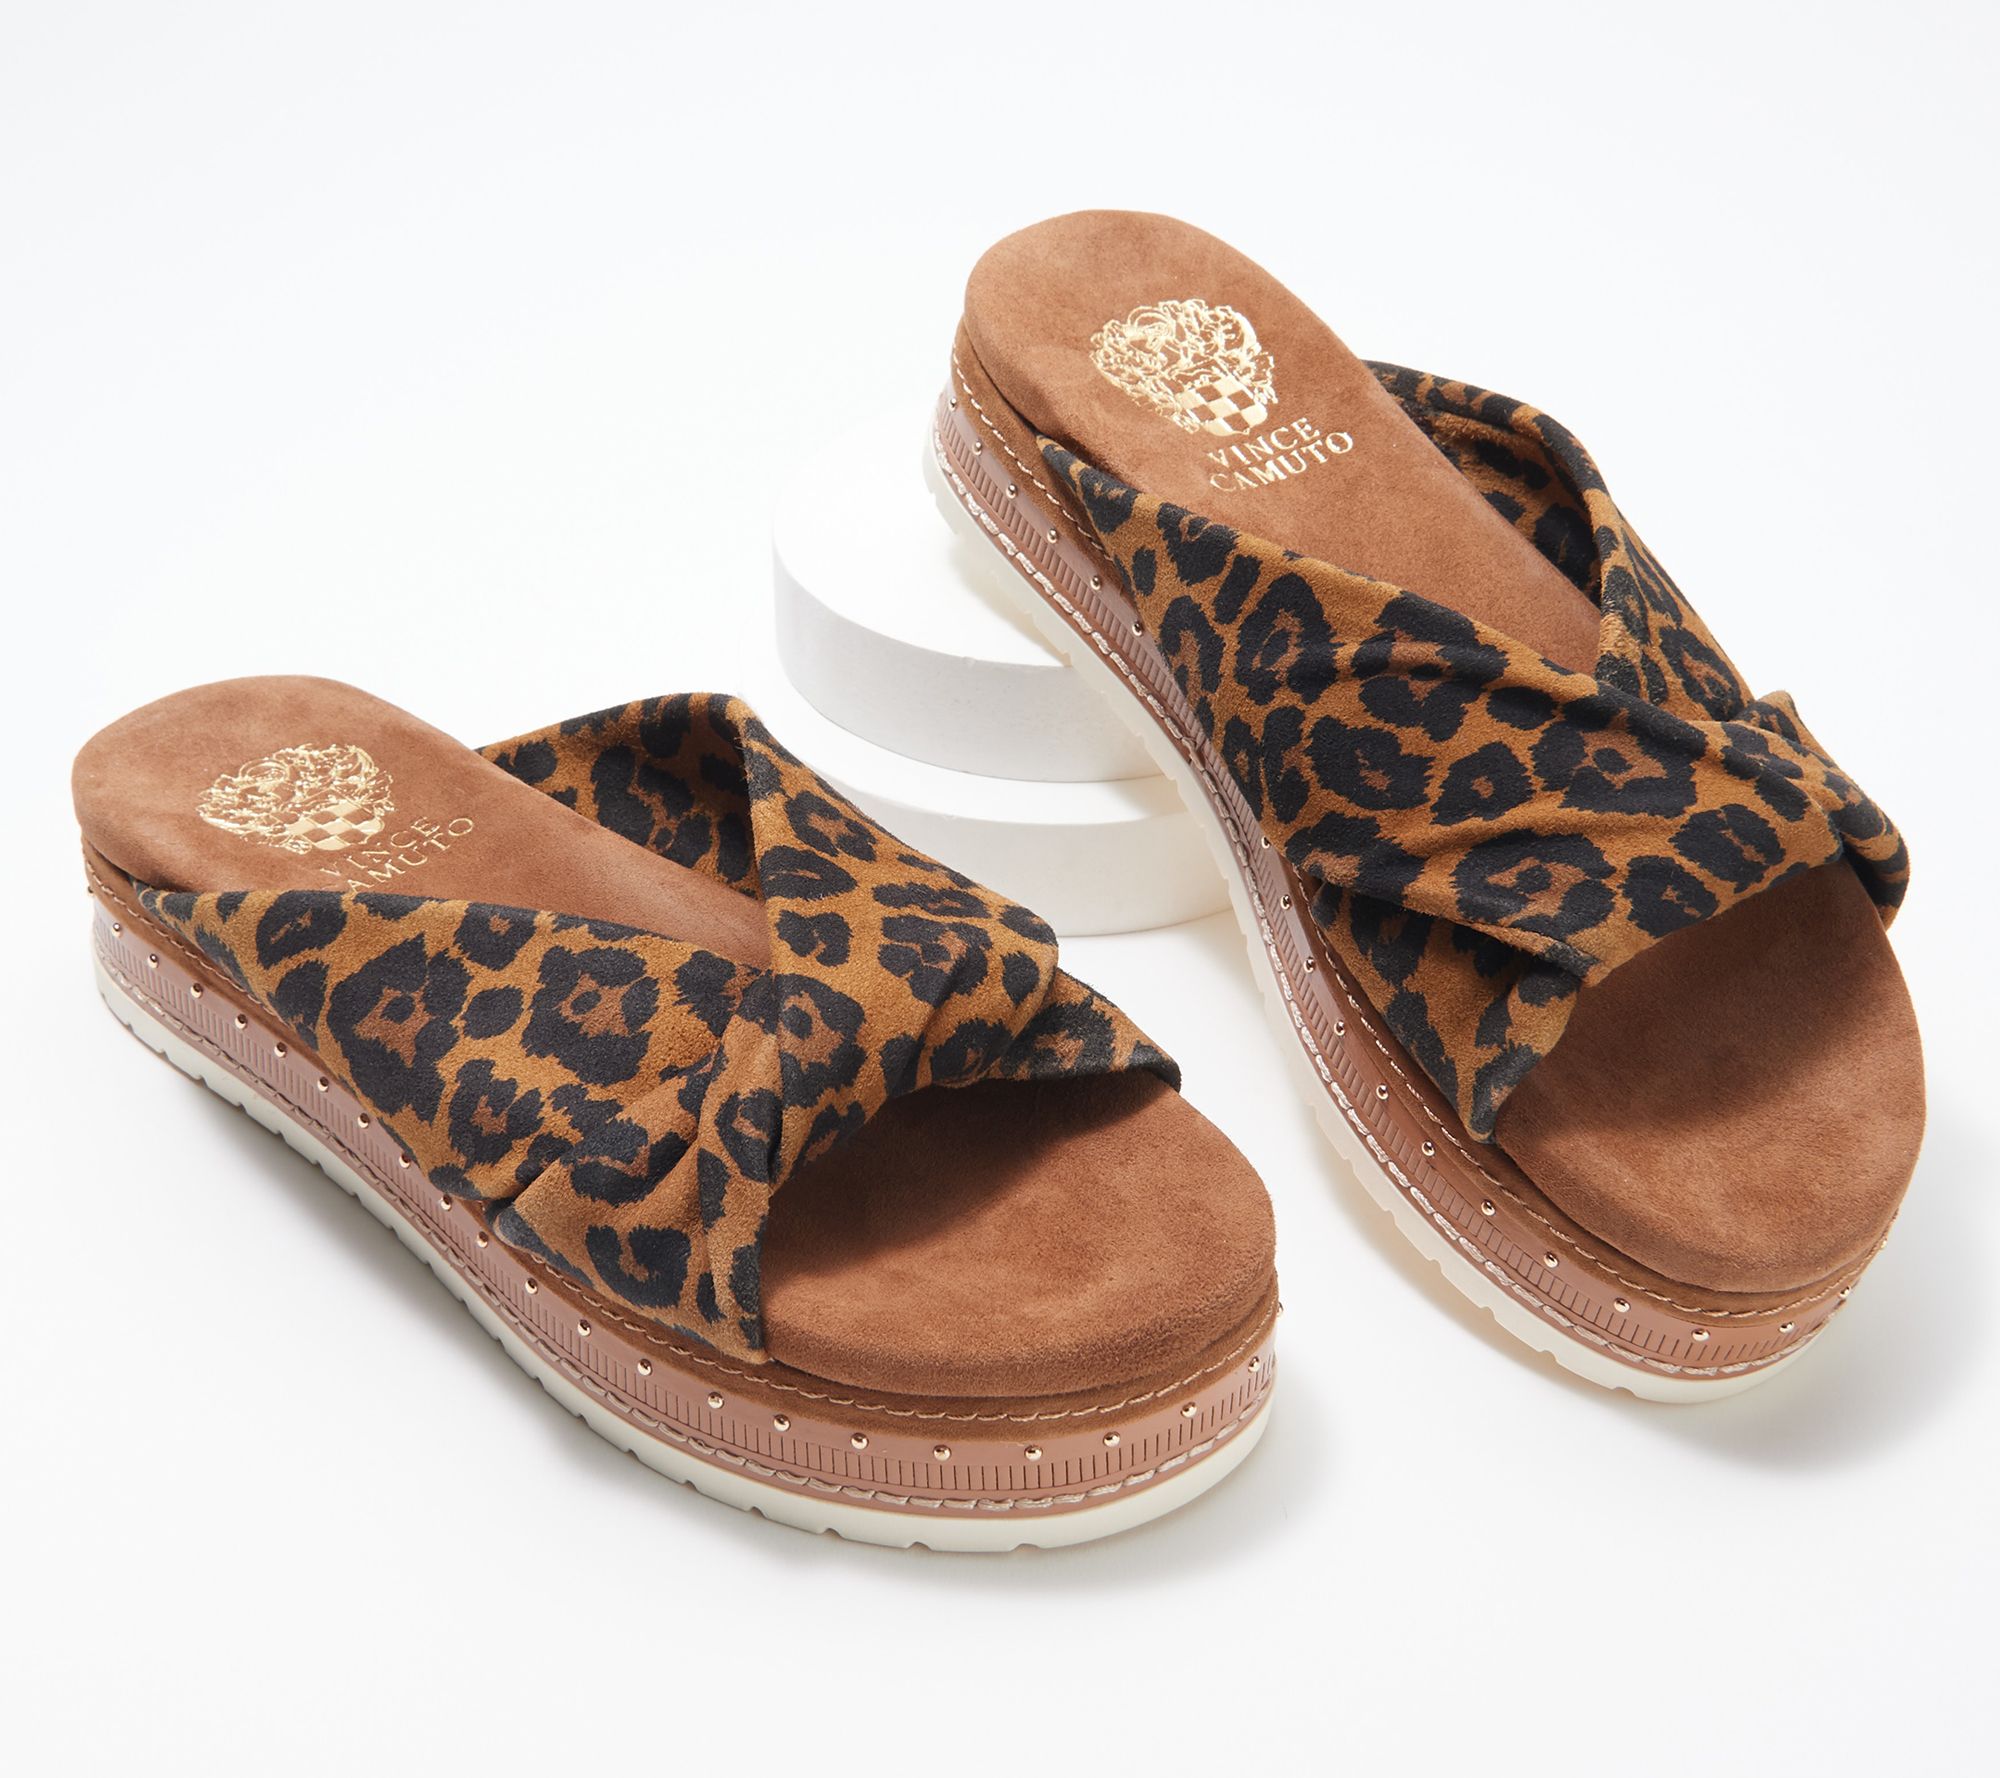 leather flip flops Summer leopard shoes Women's sandals in leather hair Gift for her Made from 100% authentic leather.